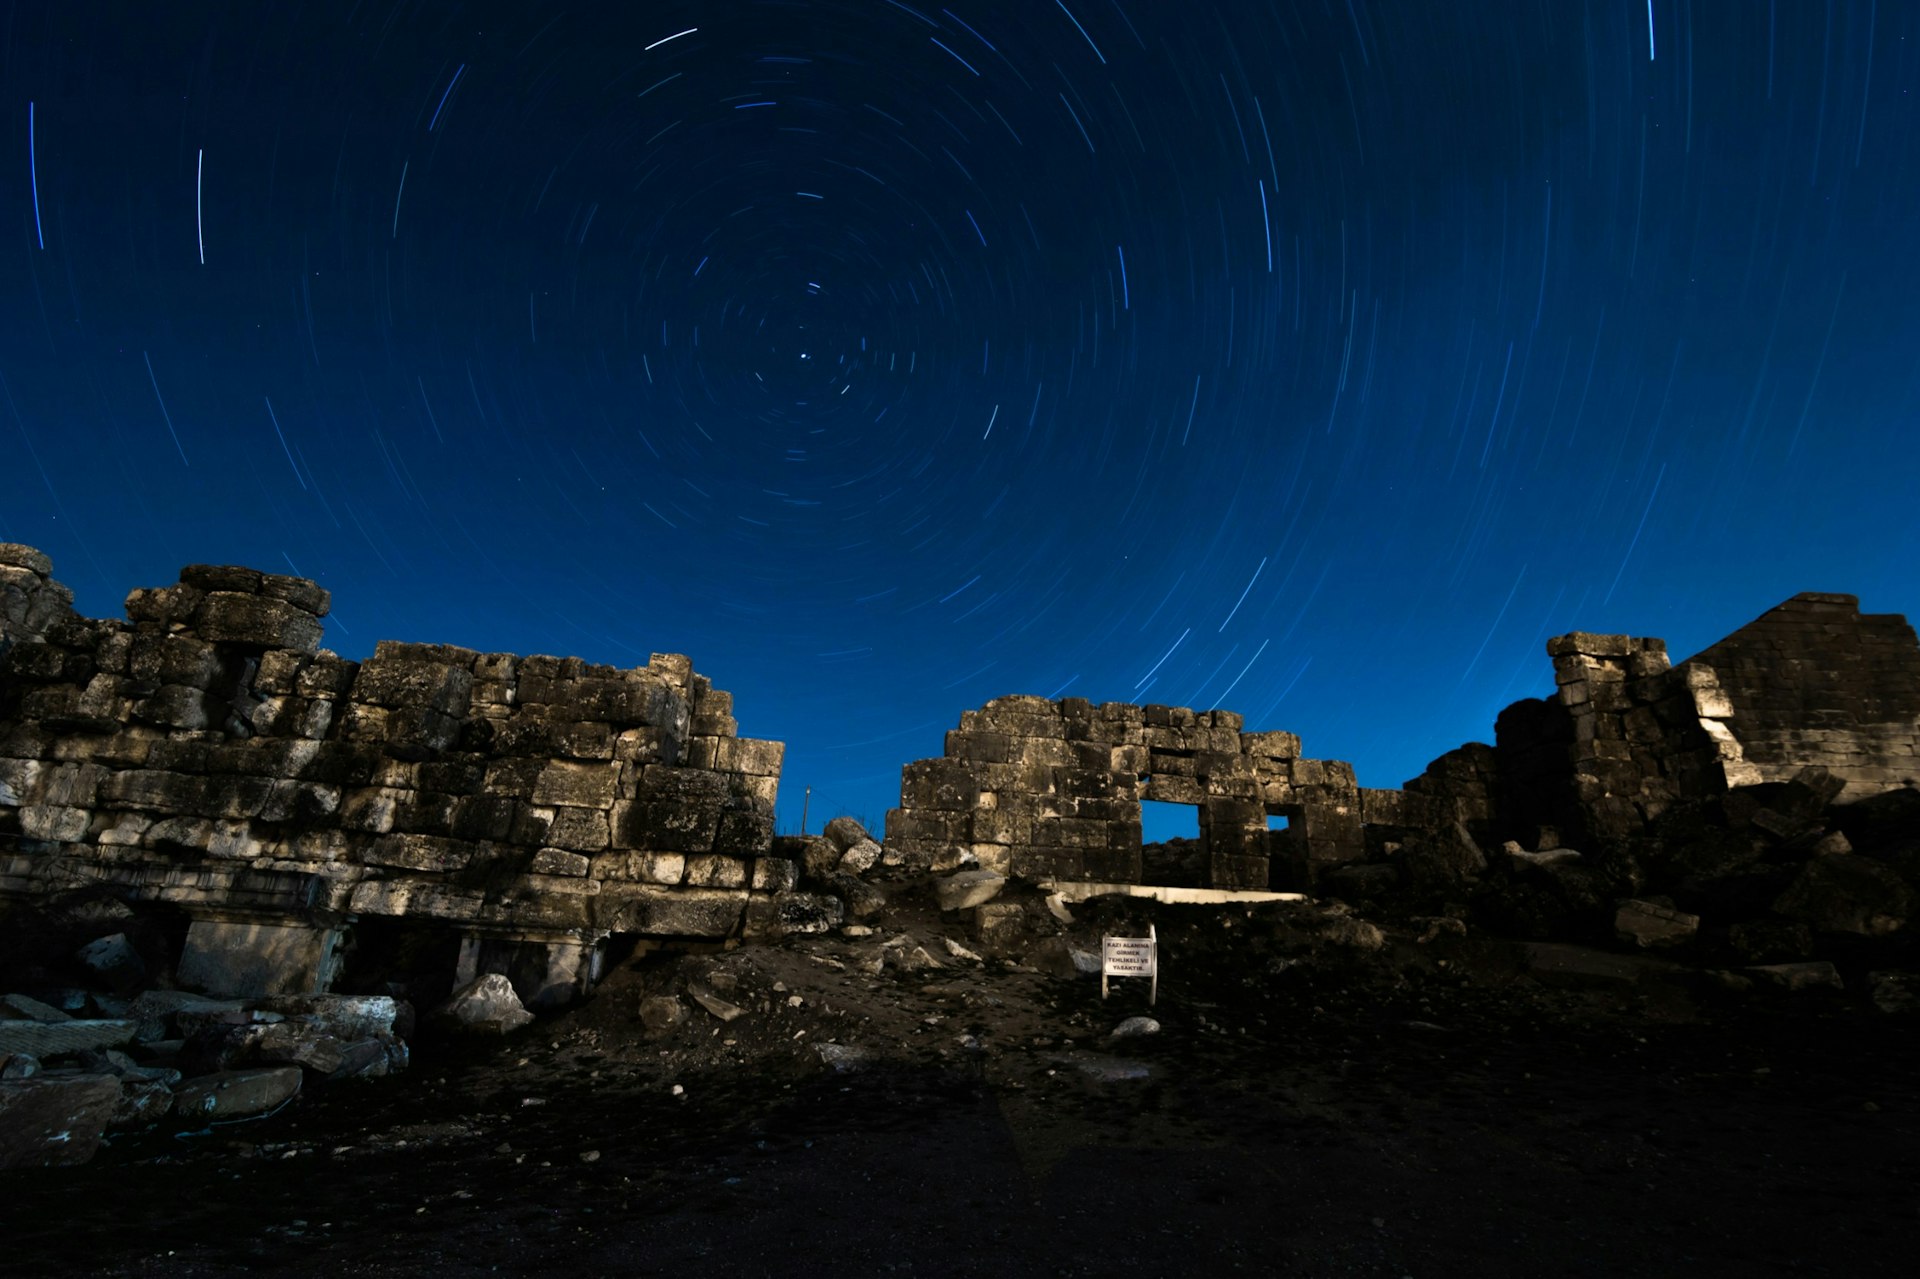 Shooting stars seen in the sky over the ancient city of Aizanoi